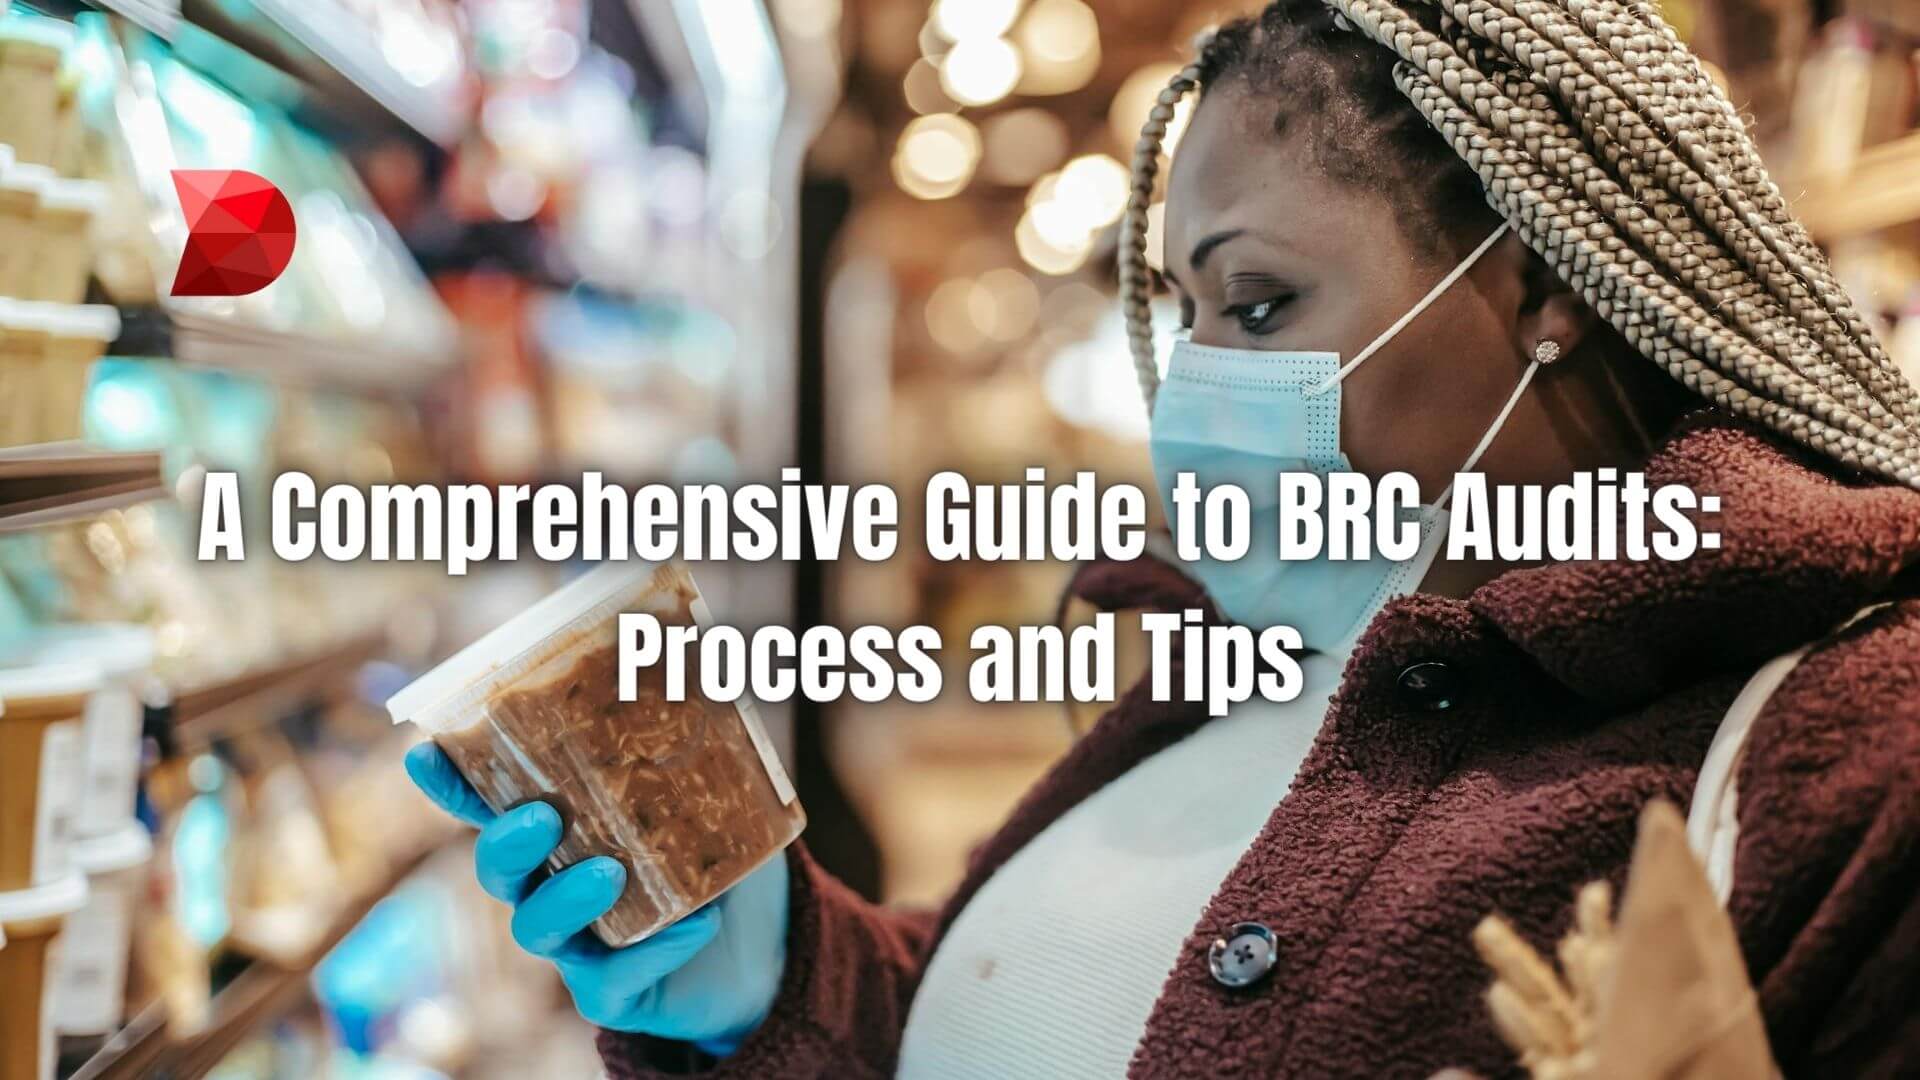 Unlock the secrets of BRC audits with our comprehensive guide! Learn the process and insider tips to ace your next audit effortlessly.